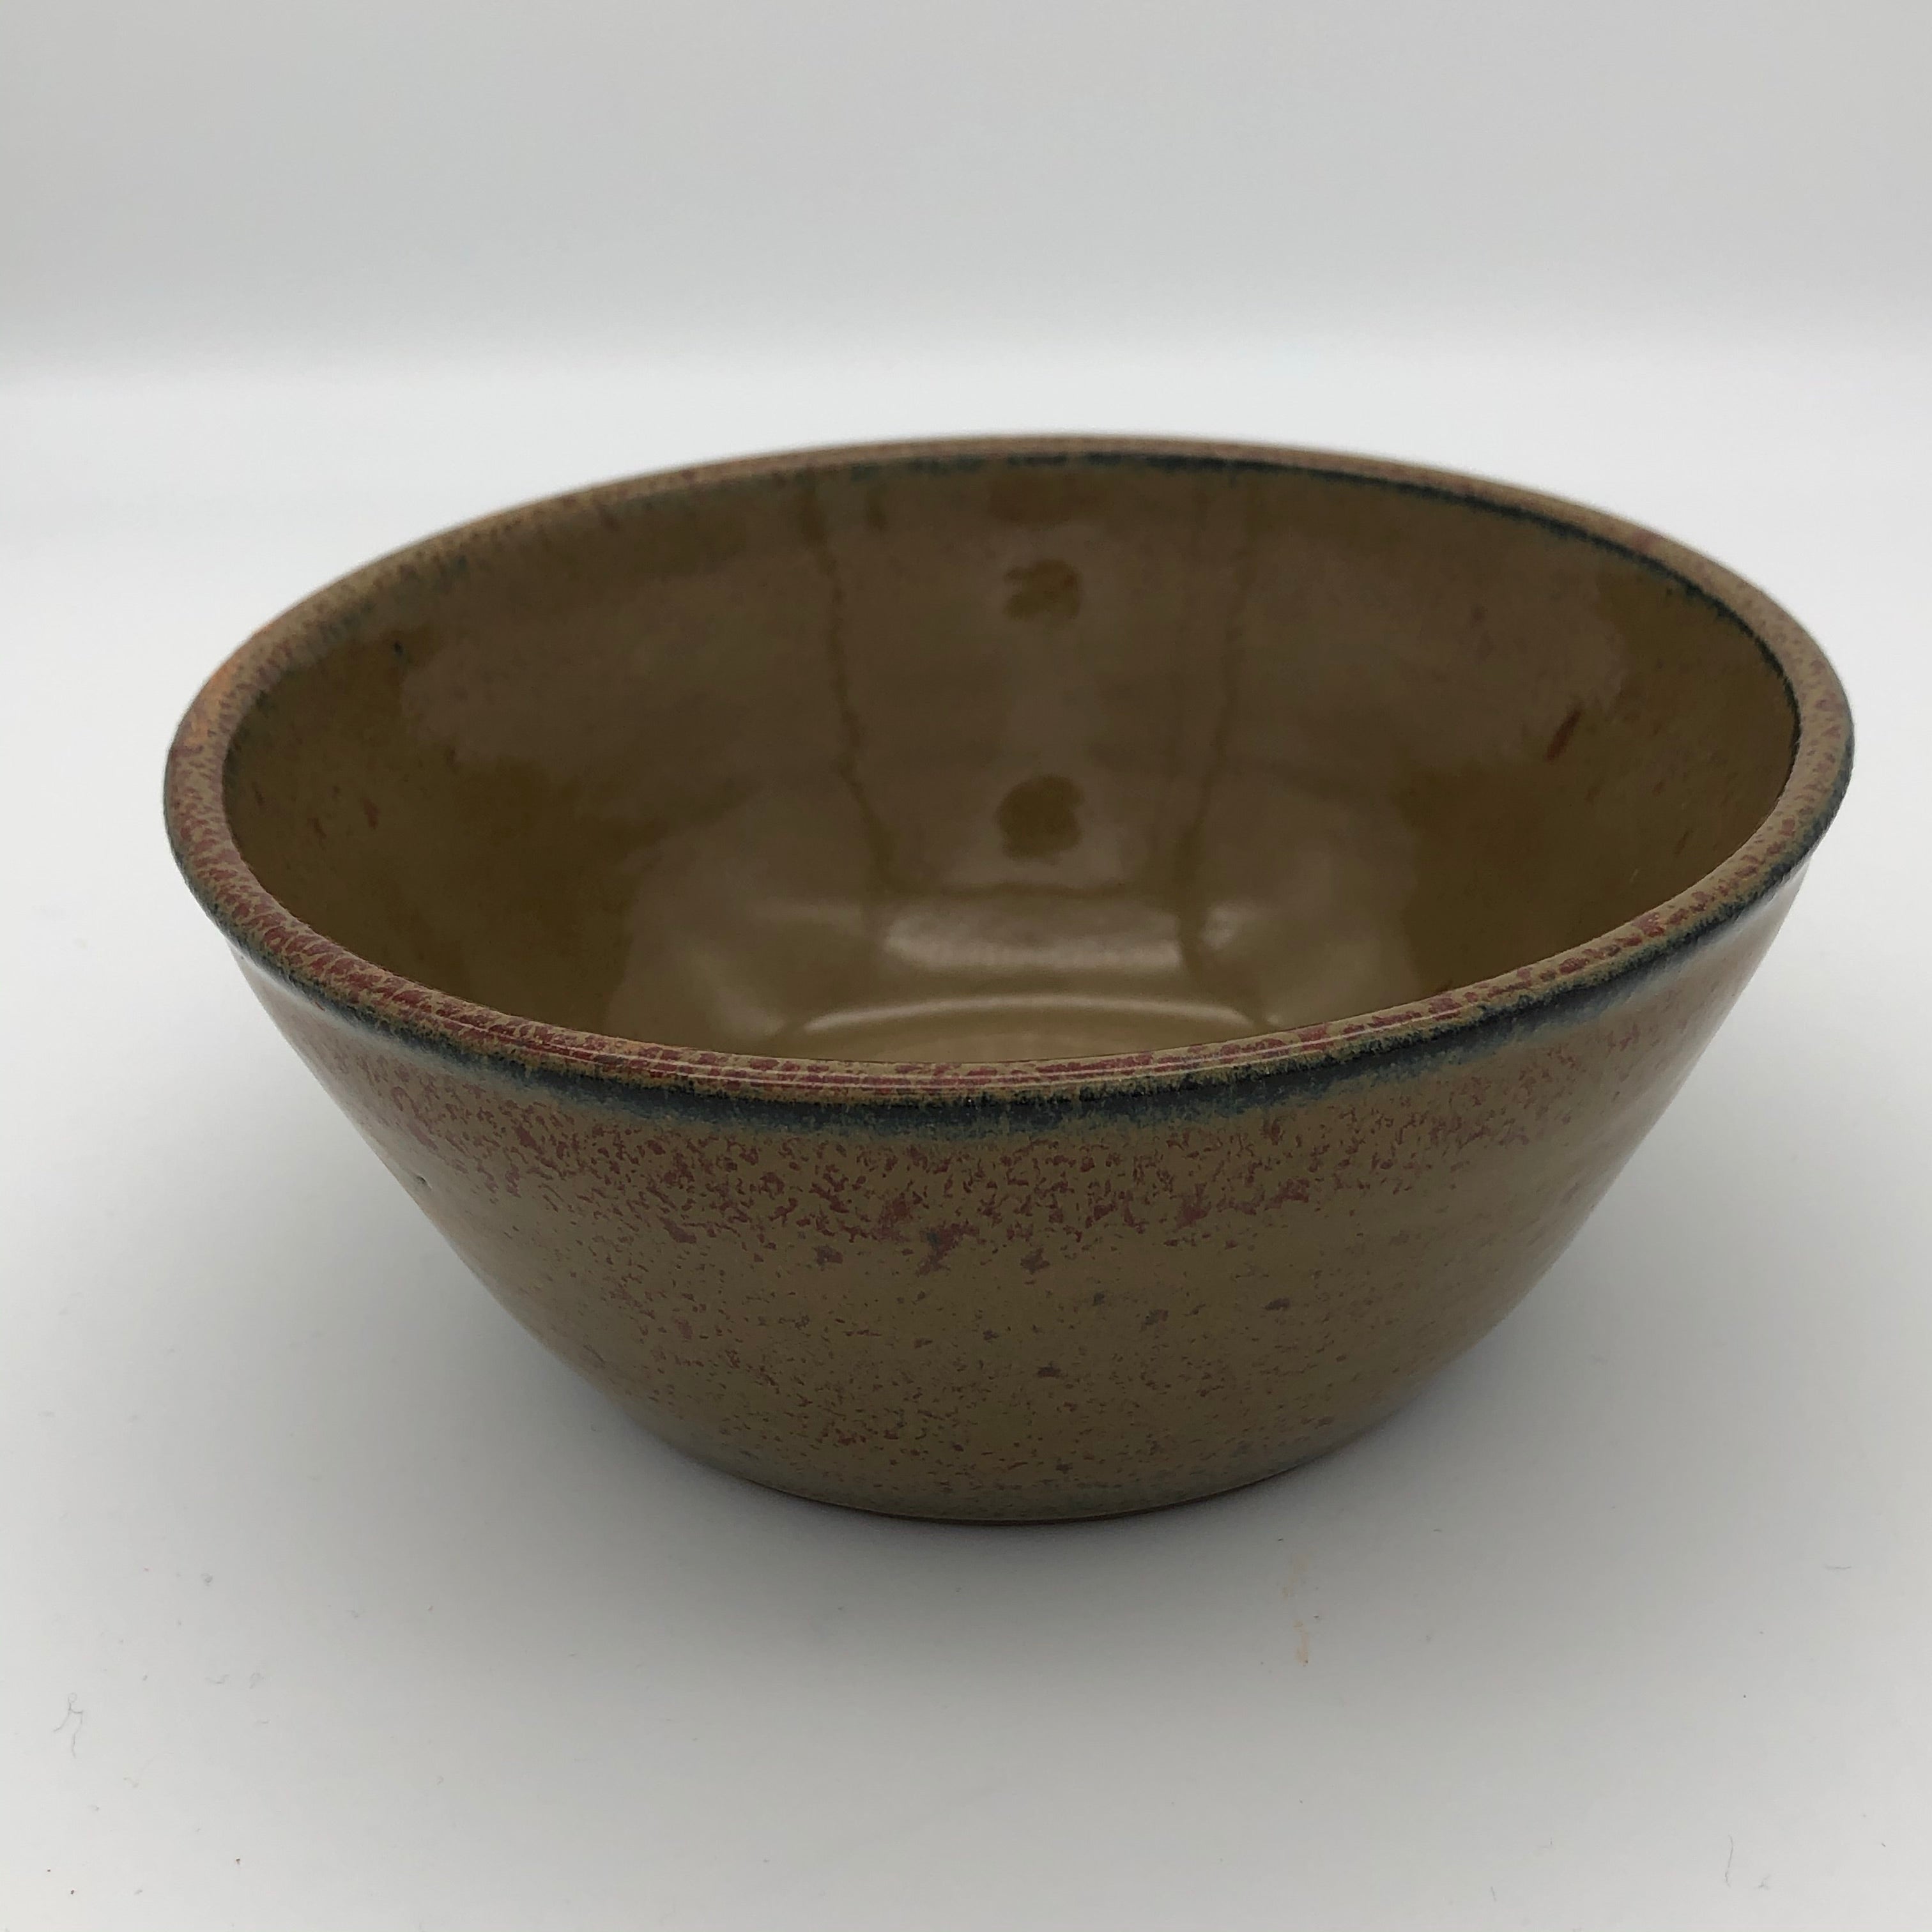 2.5 cup bowl in Cola Green